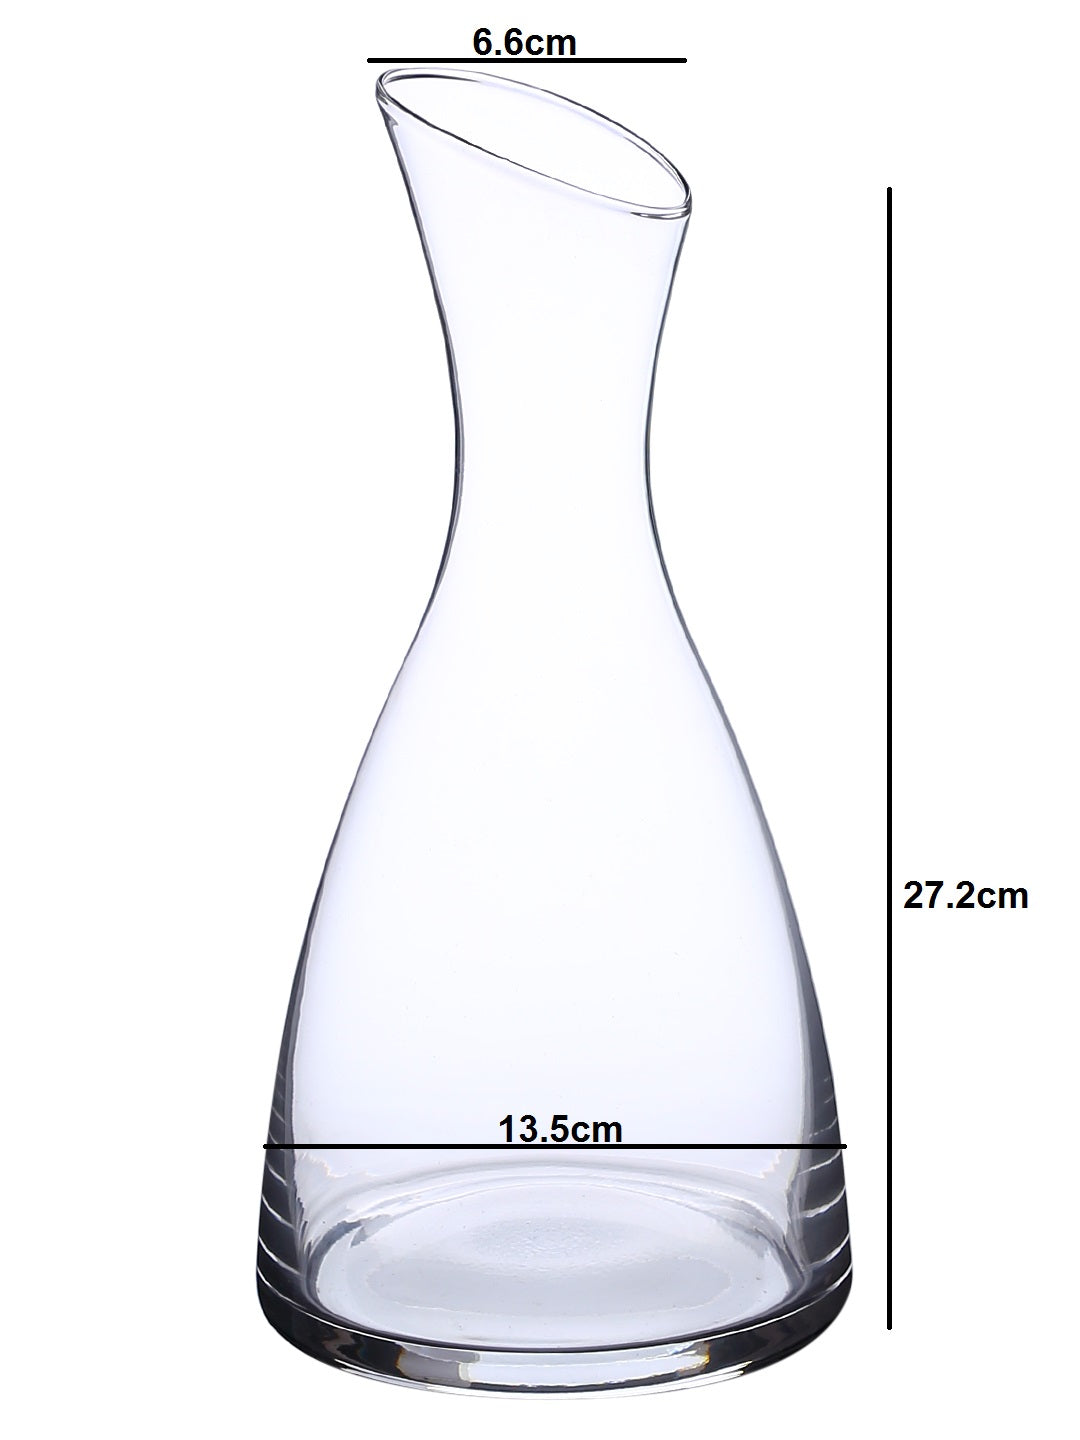 Dimensions of Bohemia Crystal Baroque Beverage Decanter - Exquisite glass vessel perfect for wine, cocktails, and beverages, made with premium Czech glass.